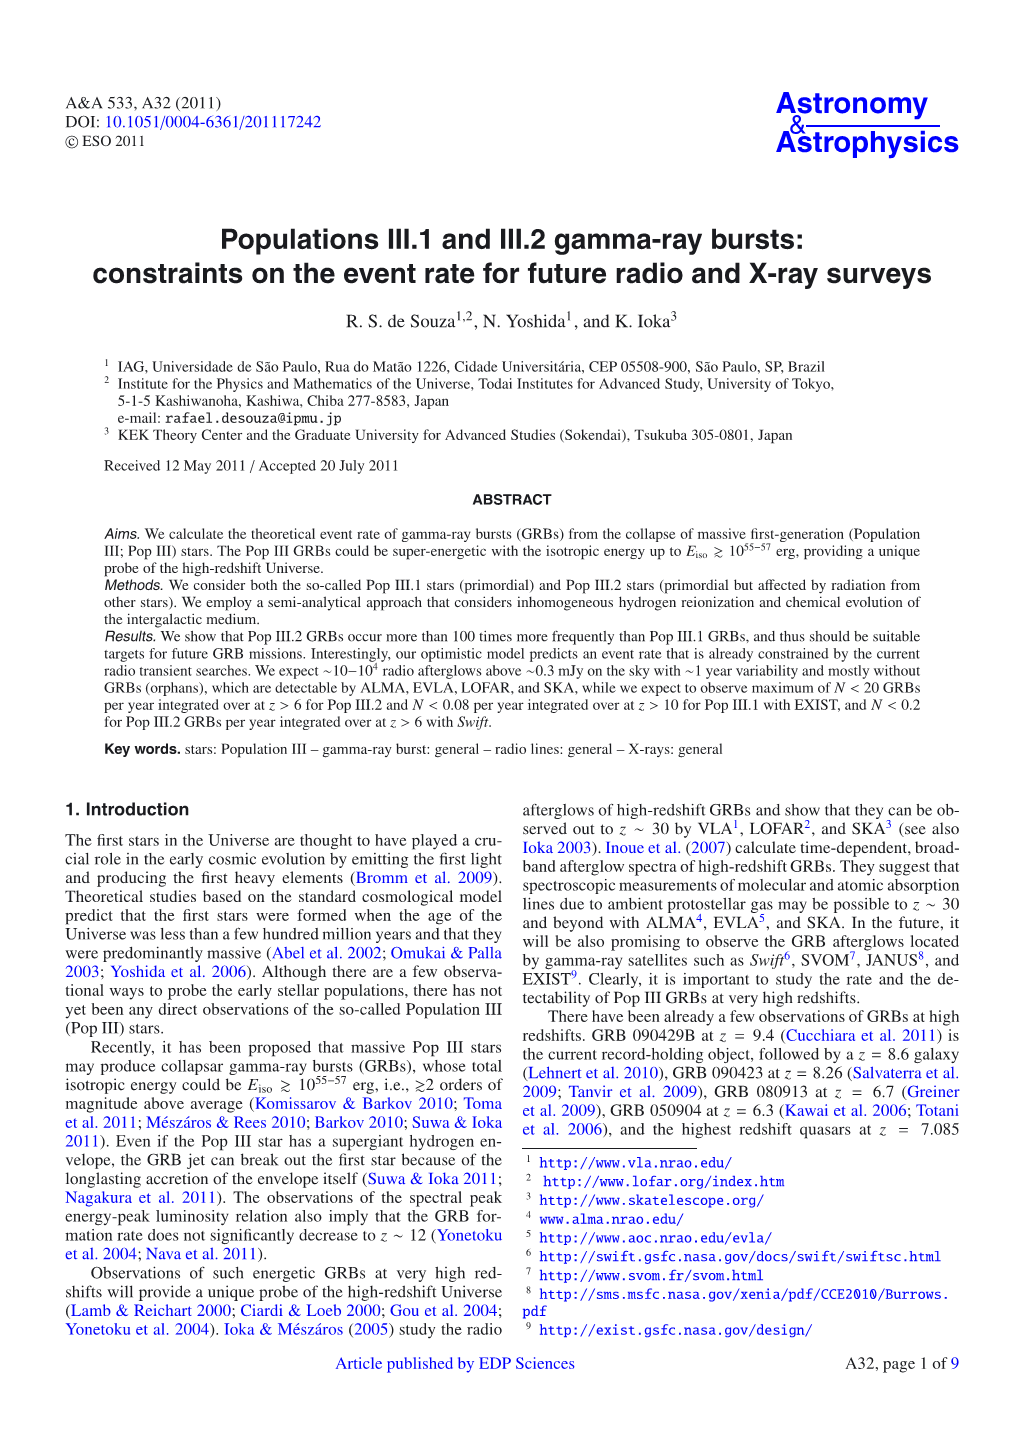 Populations III.1 and III.2 Gamma-Ray Bursts: Constraints on the Event Rate for Future Radio and X-Ray Surveys